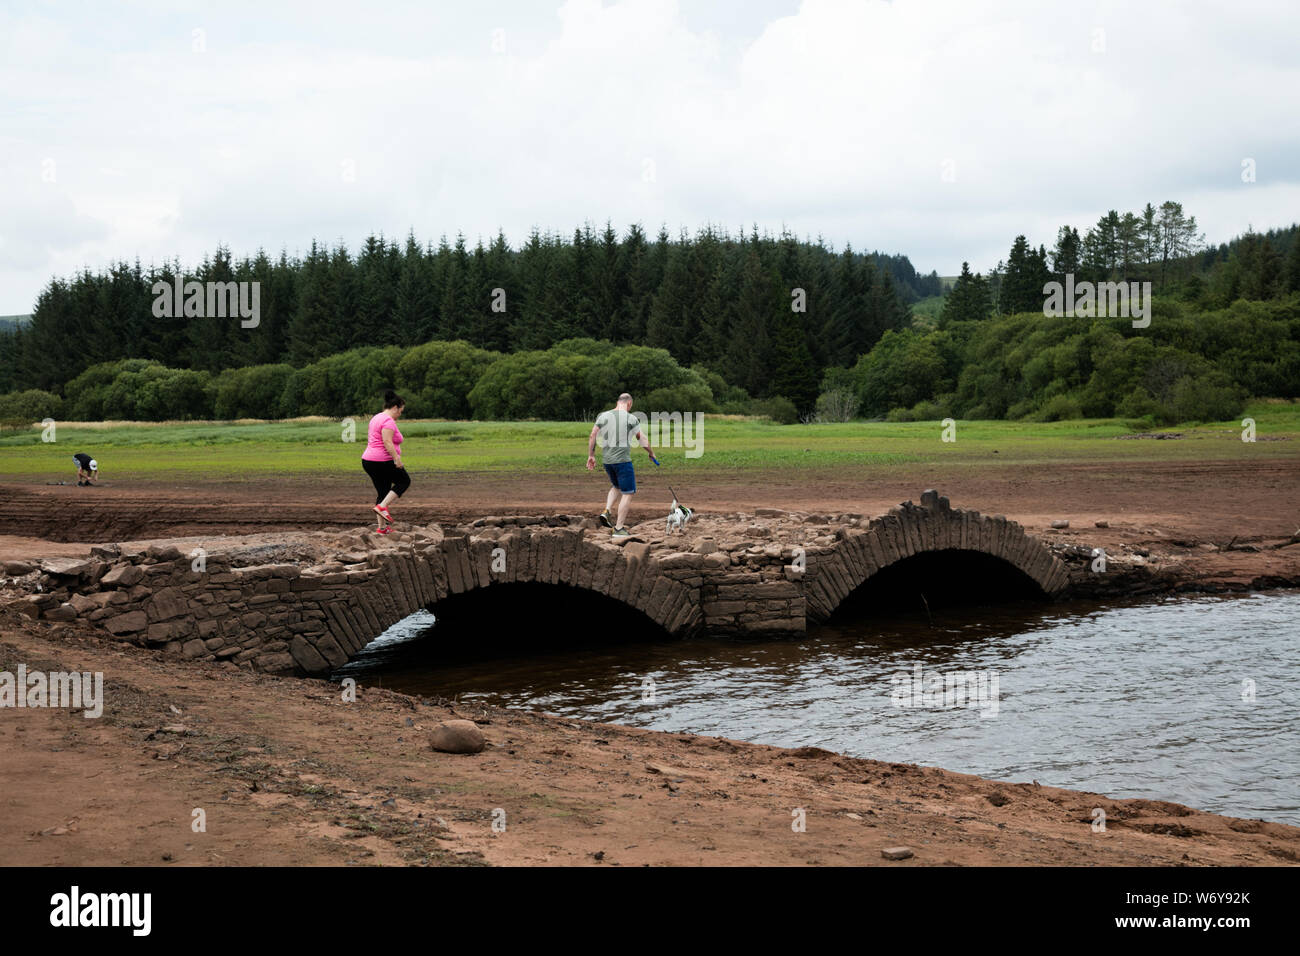 Llwyn On Reservoir, Merthyr Tydfil, South Wales, UK.  3 August 2019.  UK weather: With the continued heatwave over recent weeks, the reservoir has depleted and uncovered an old bridge normally underwater, Pont Yr Daf.  It was in use before the reservoir's construction.  Credit: Andrew Bartlett/Alamy Live News Stock Photo